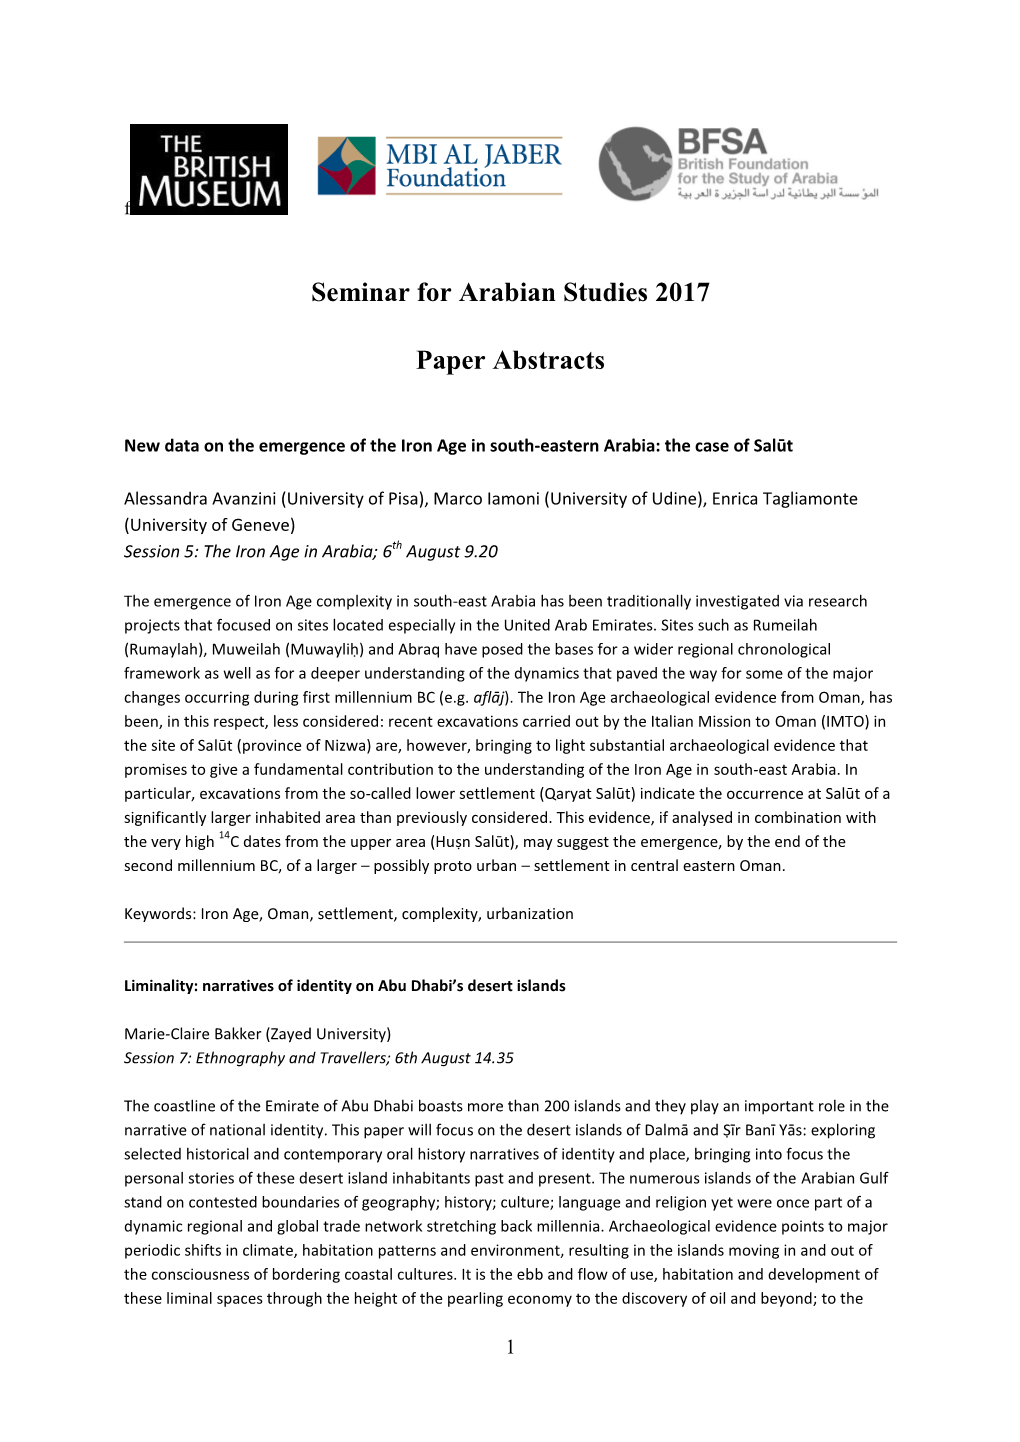 Seminar for Arabian Studies 2017 Paper Abstracts